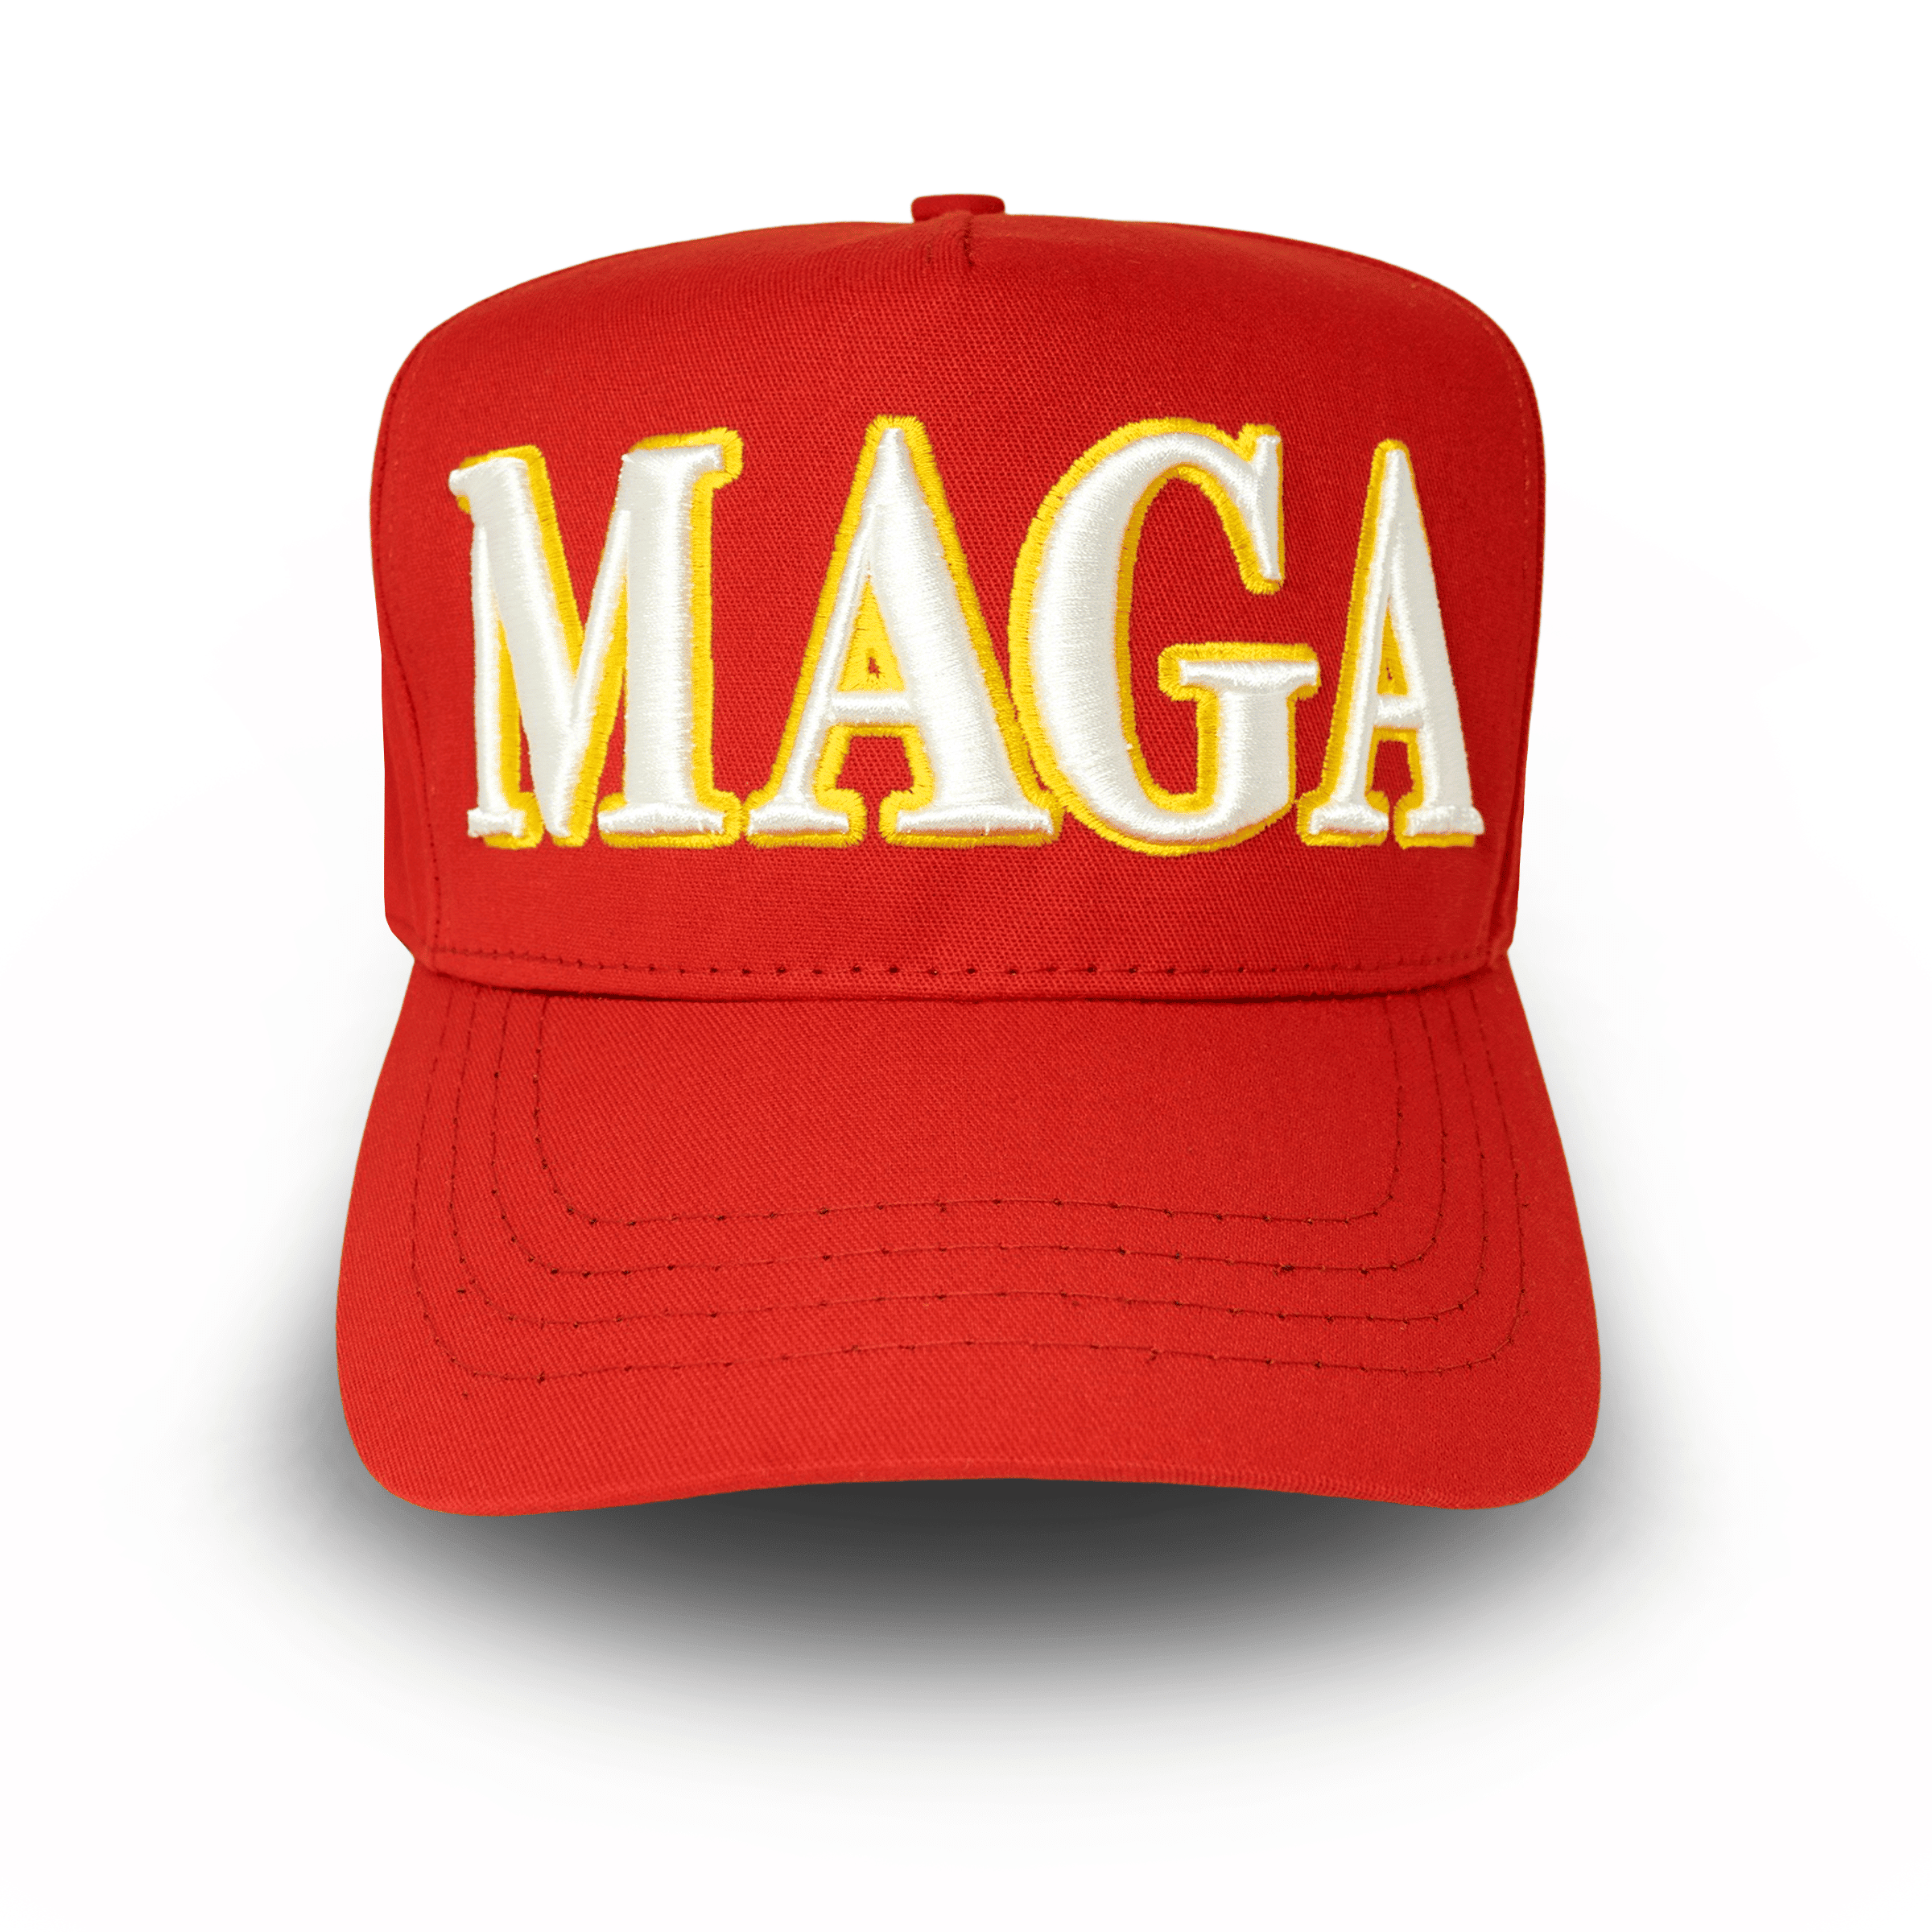 https://www.trumpstore.com/wp-content/uploads/2022/11/Maga-Hat-Red-Yellow.png